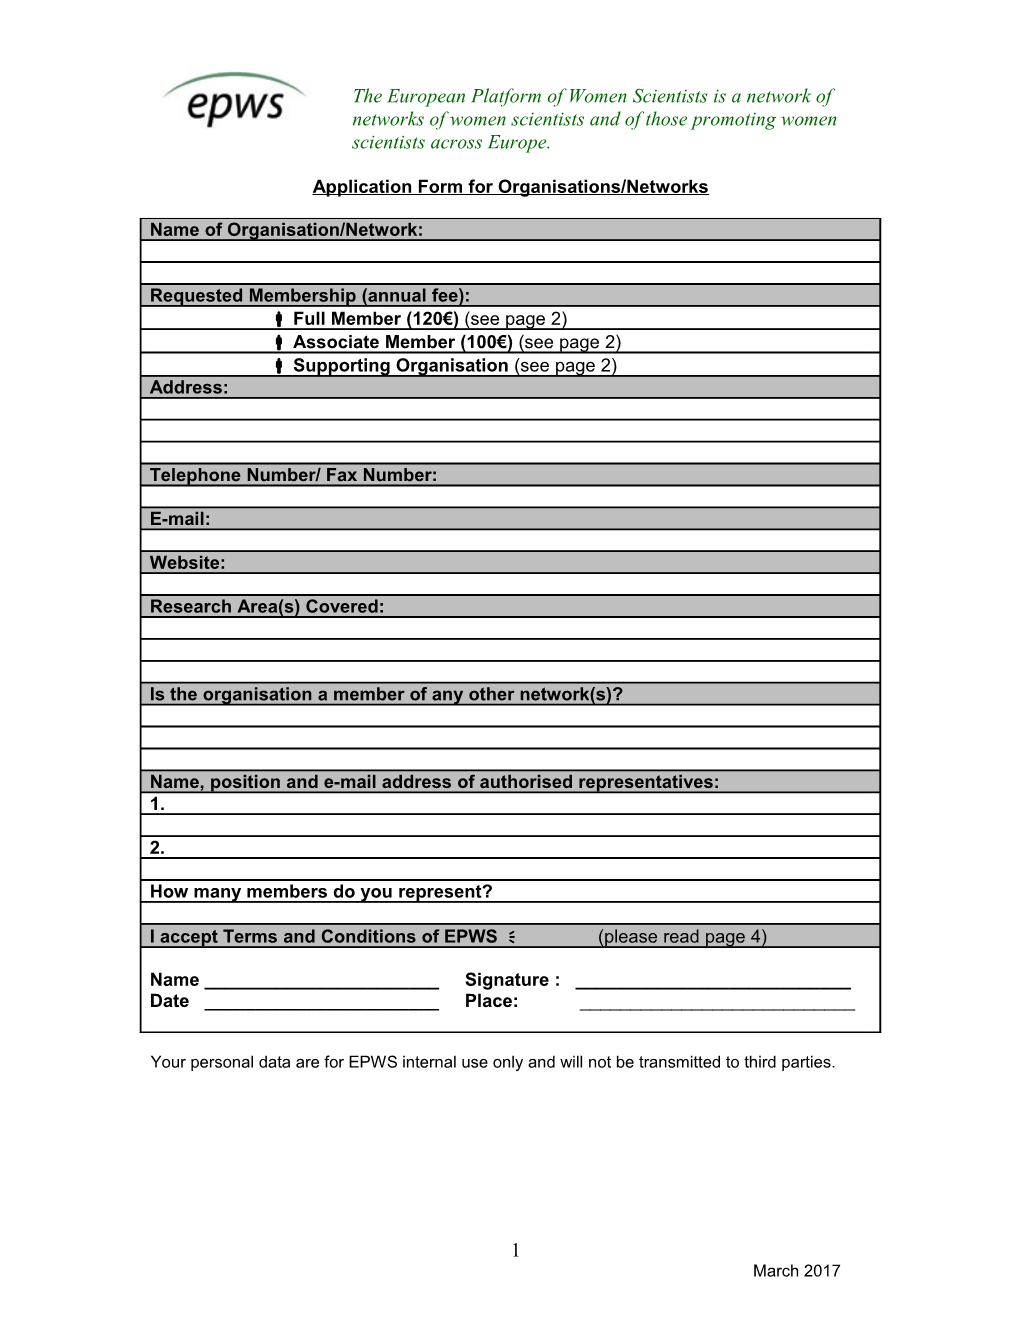 Application Form for Organisations/Networks